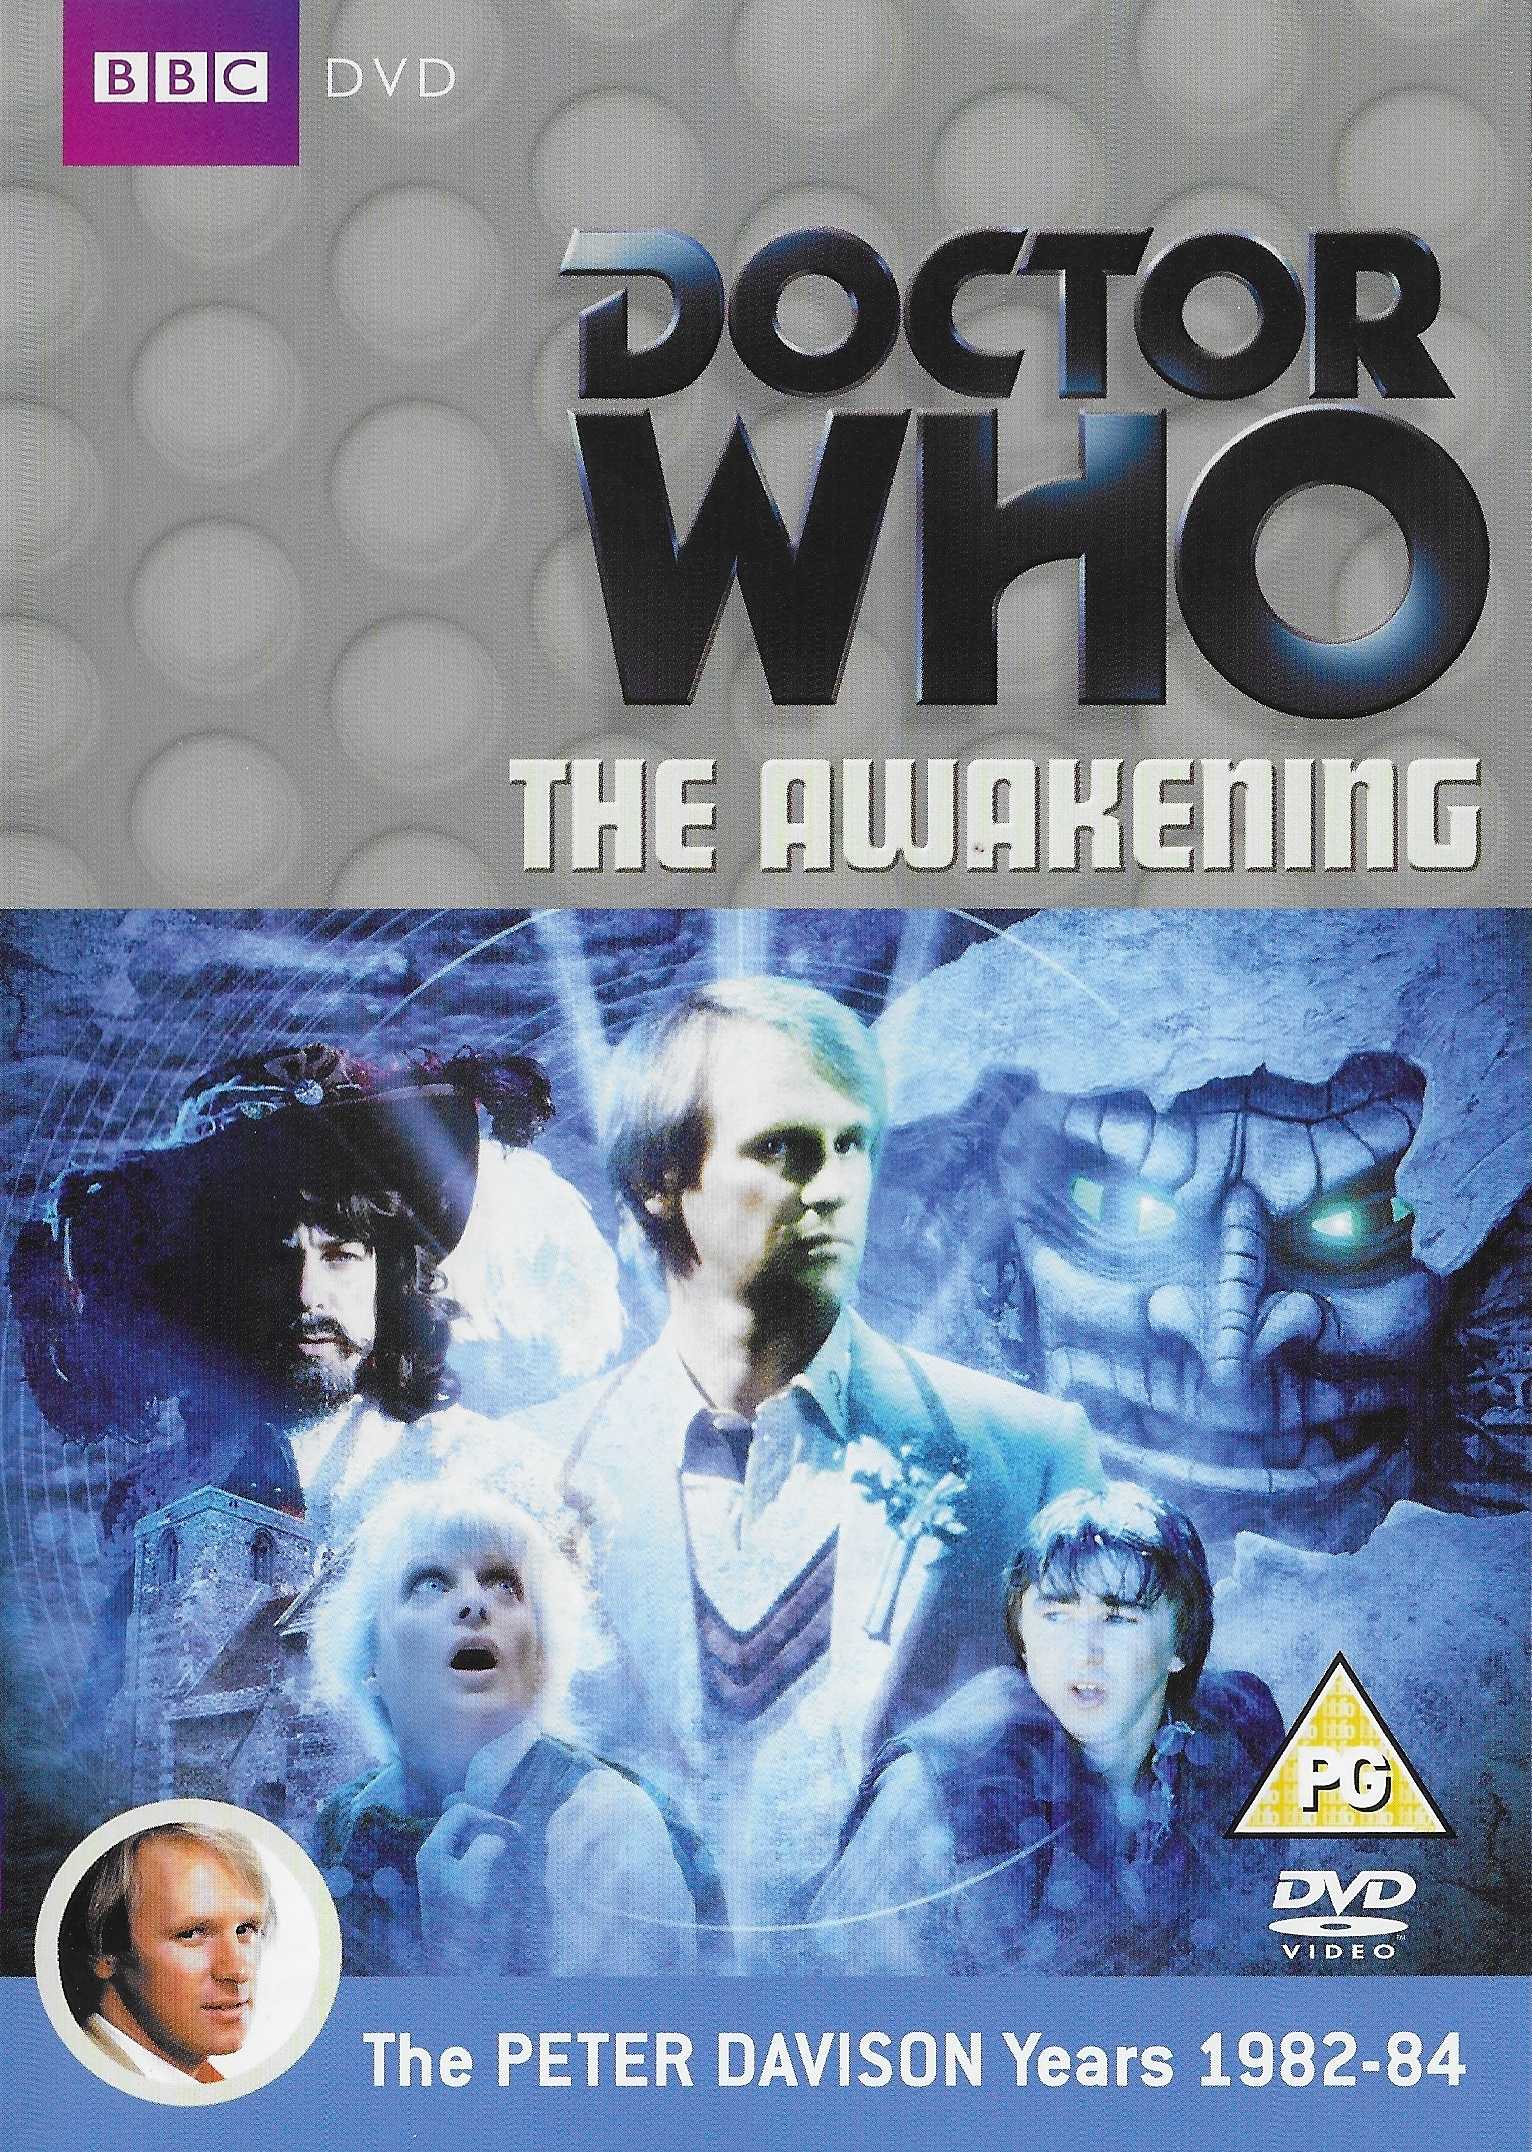 Picture of BBCDVD 3380B Doctor Who - The awakening by artist Malcolm Hulke from the BBC dvds - Records and Tapes library